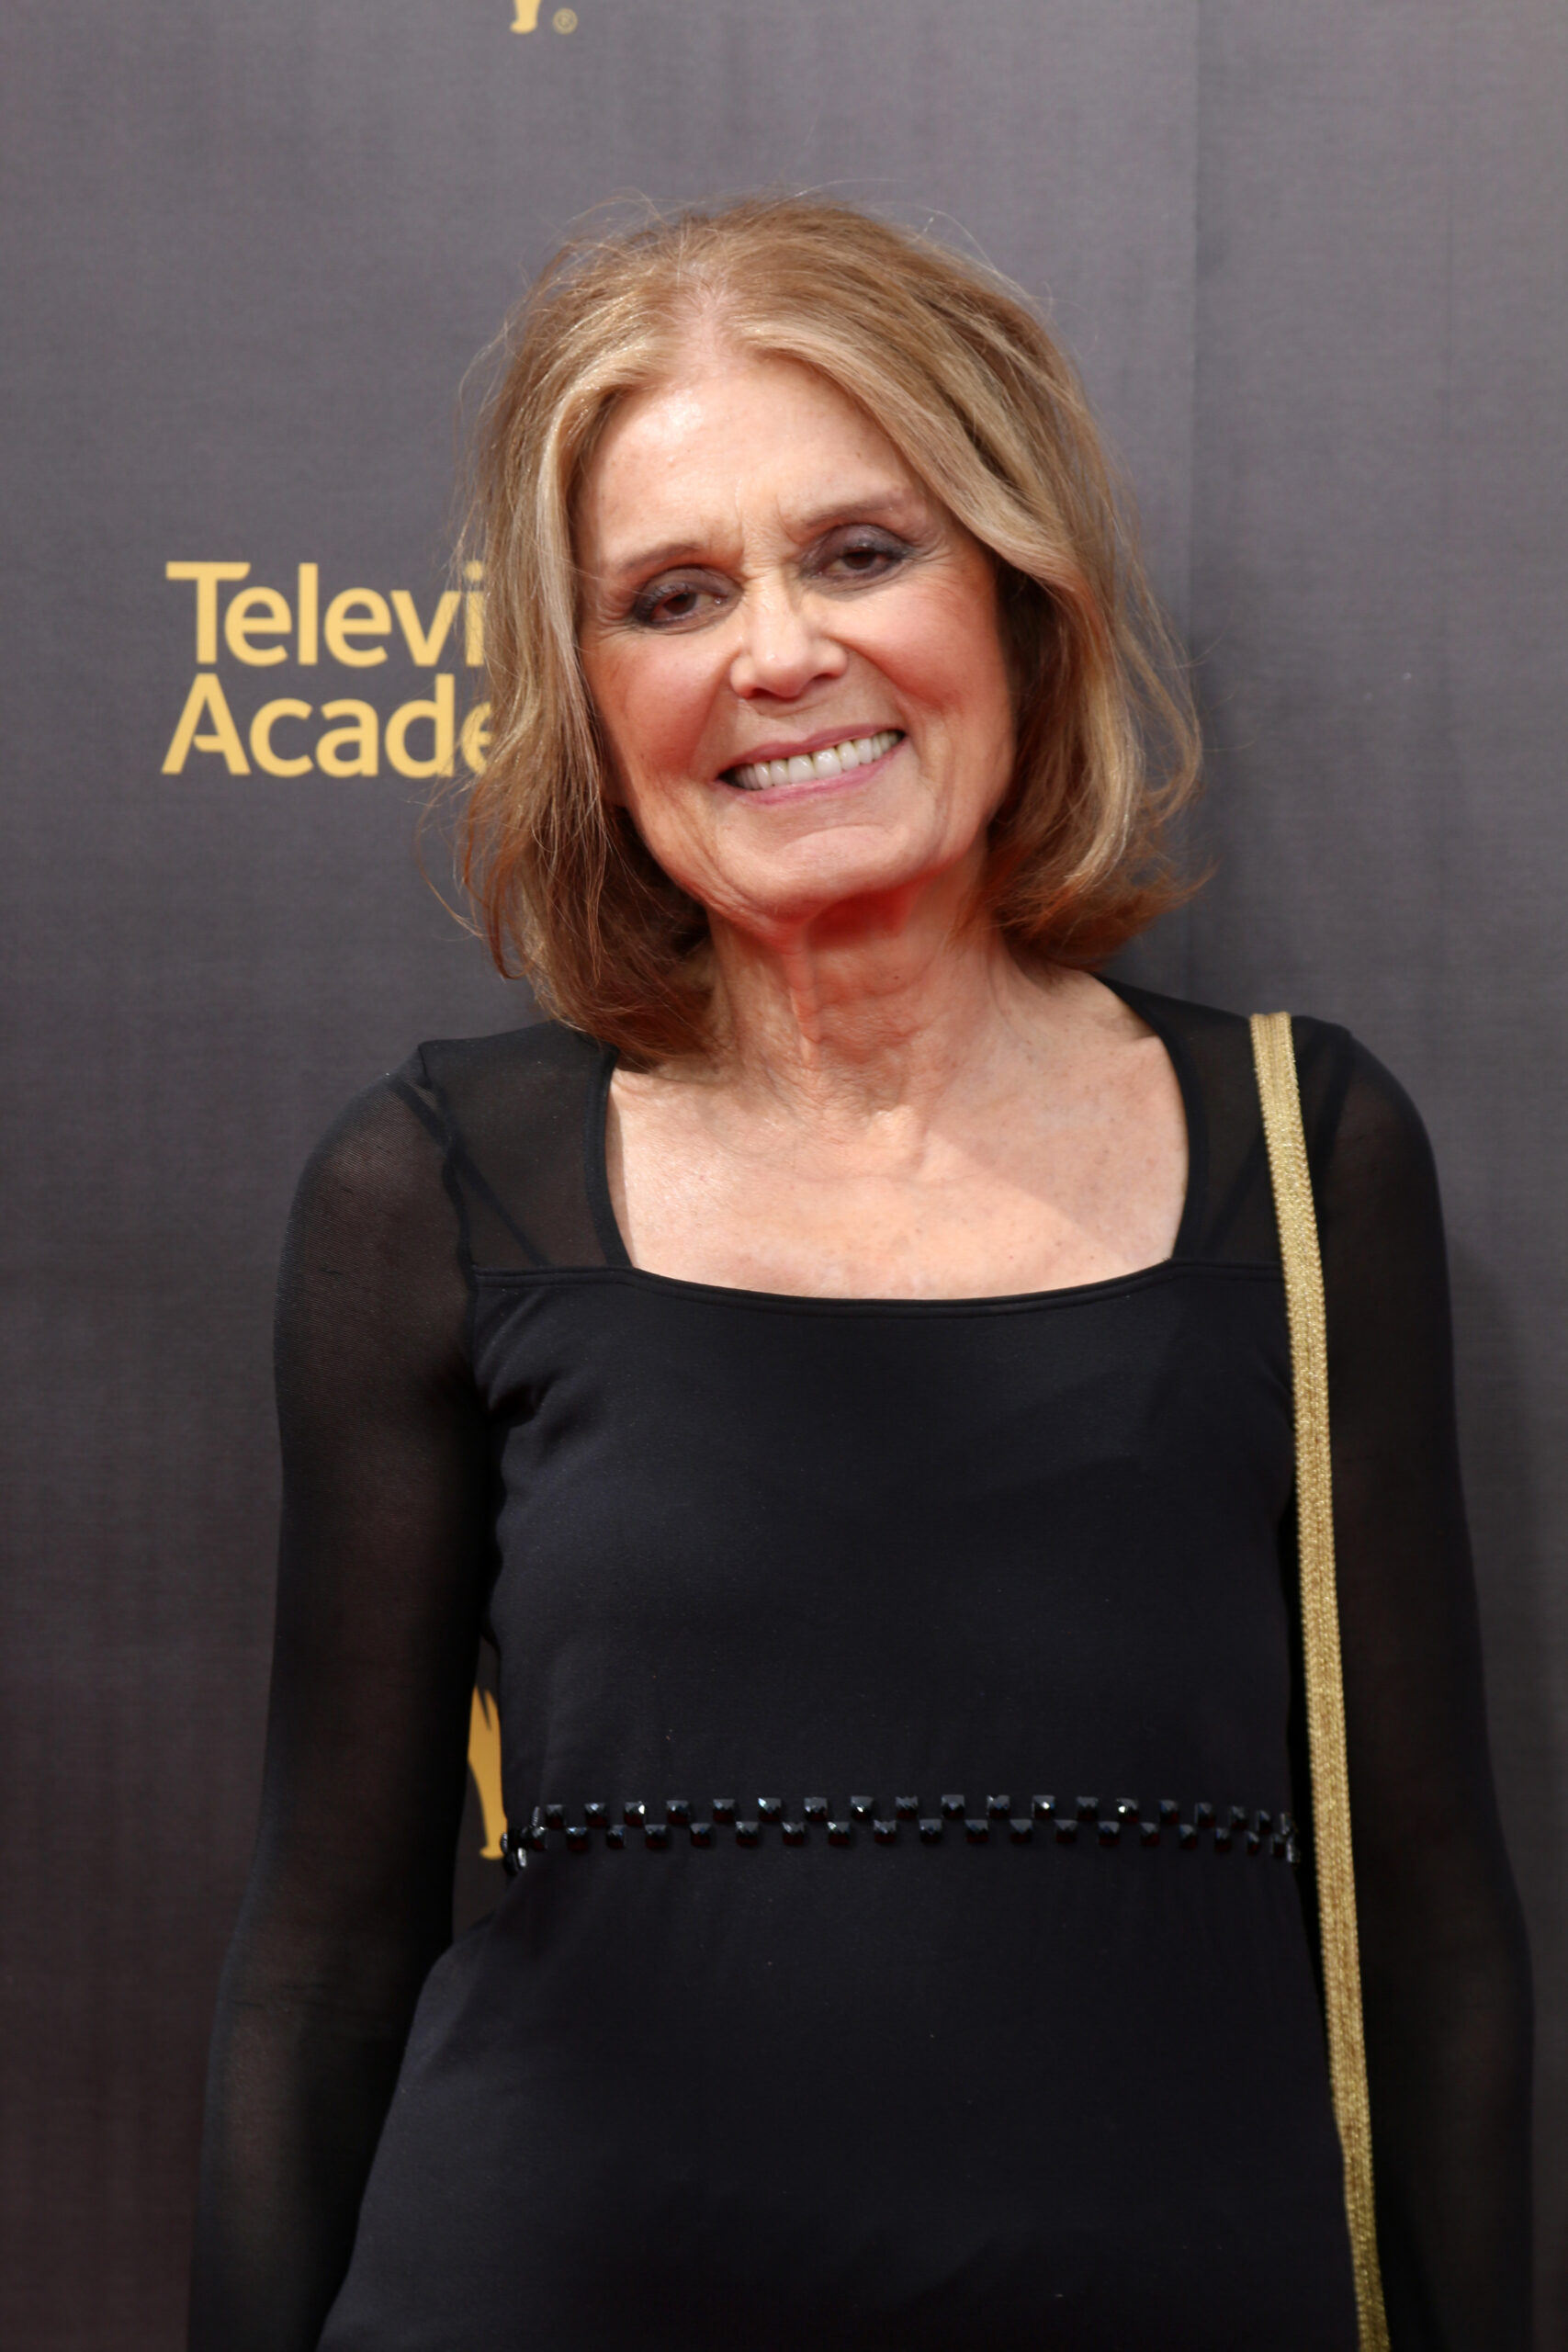 Gloria Steinem Shares Why She Believes The 'Karen' Meme Is Sexist